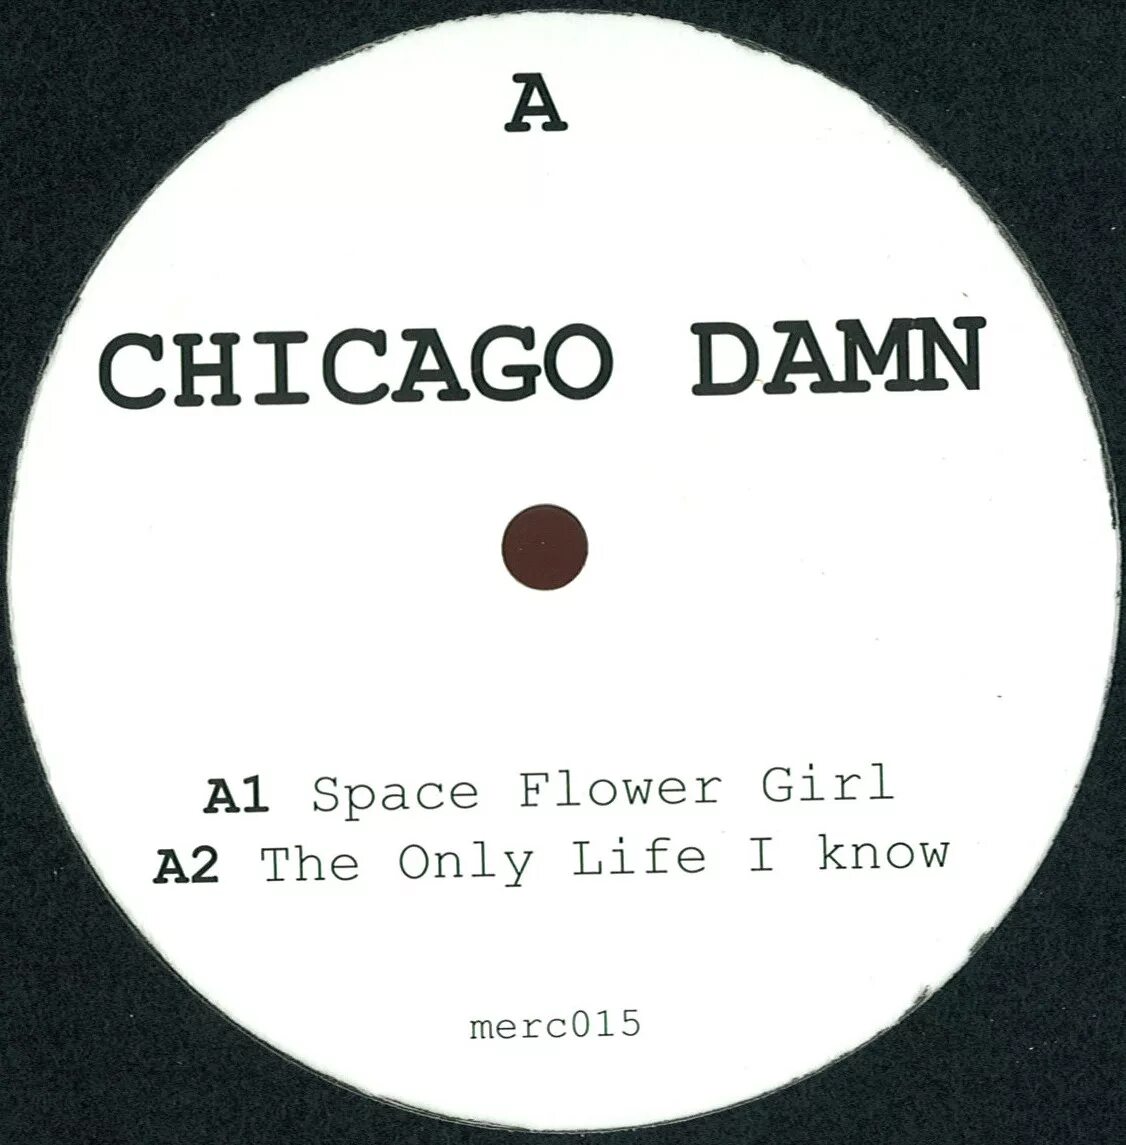 Space Flower must. Chicago - Chicago XXXVI 'Now' (2014) Vinyl. Space Flower must have. Damn Mark. Only life this only life